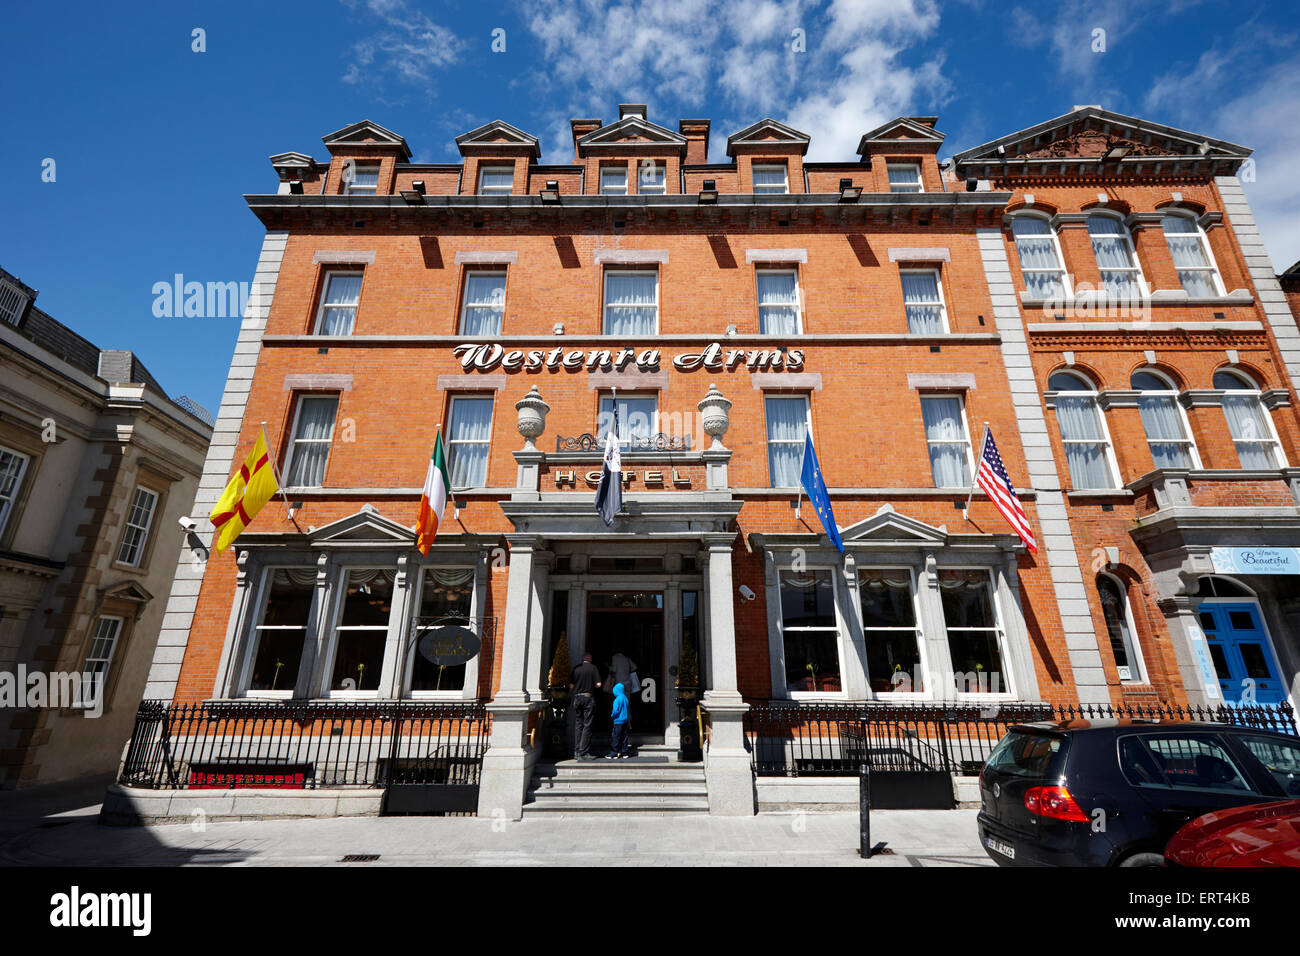 Westenra arms hotel monaghan town county monaghan republic of ireland Stock Photo